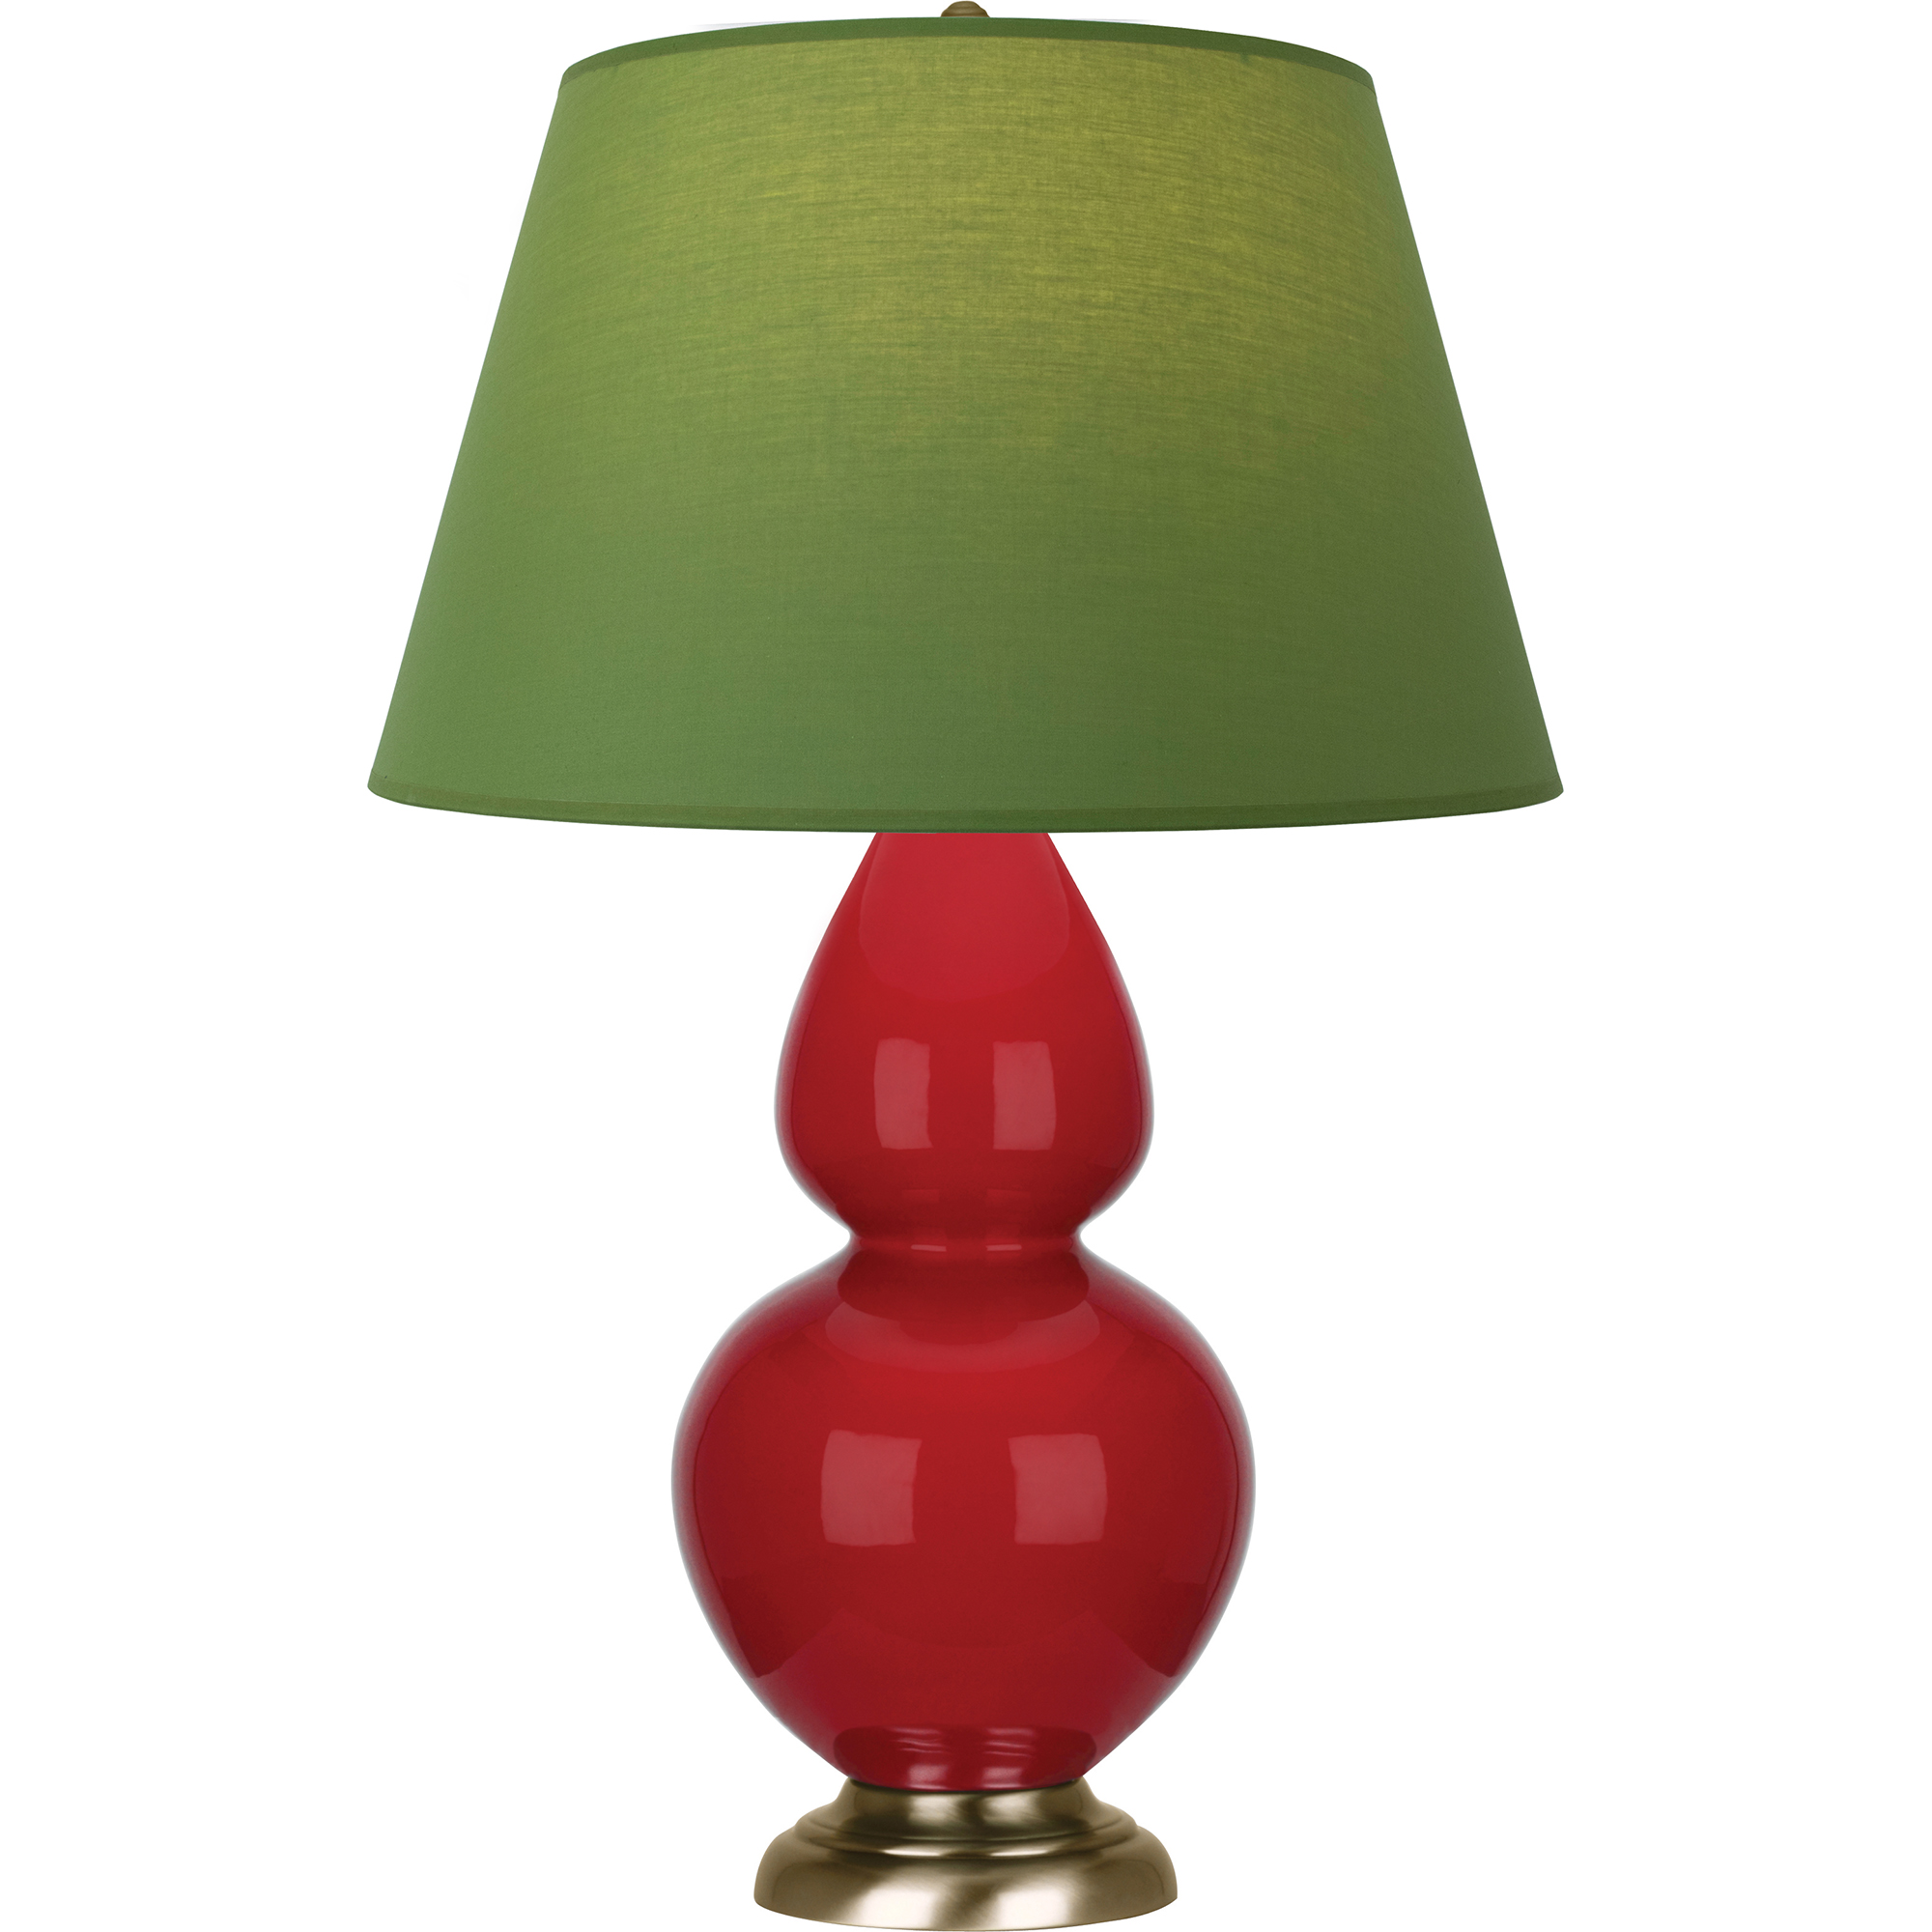 Double Gourd Table Lamp Style #RR20G